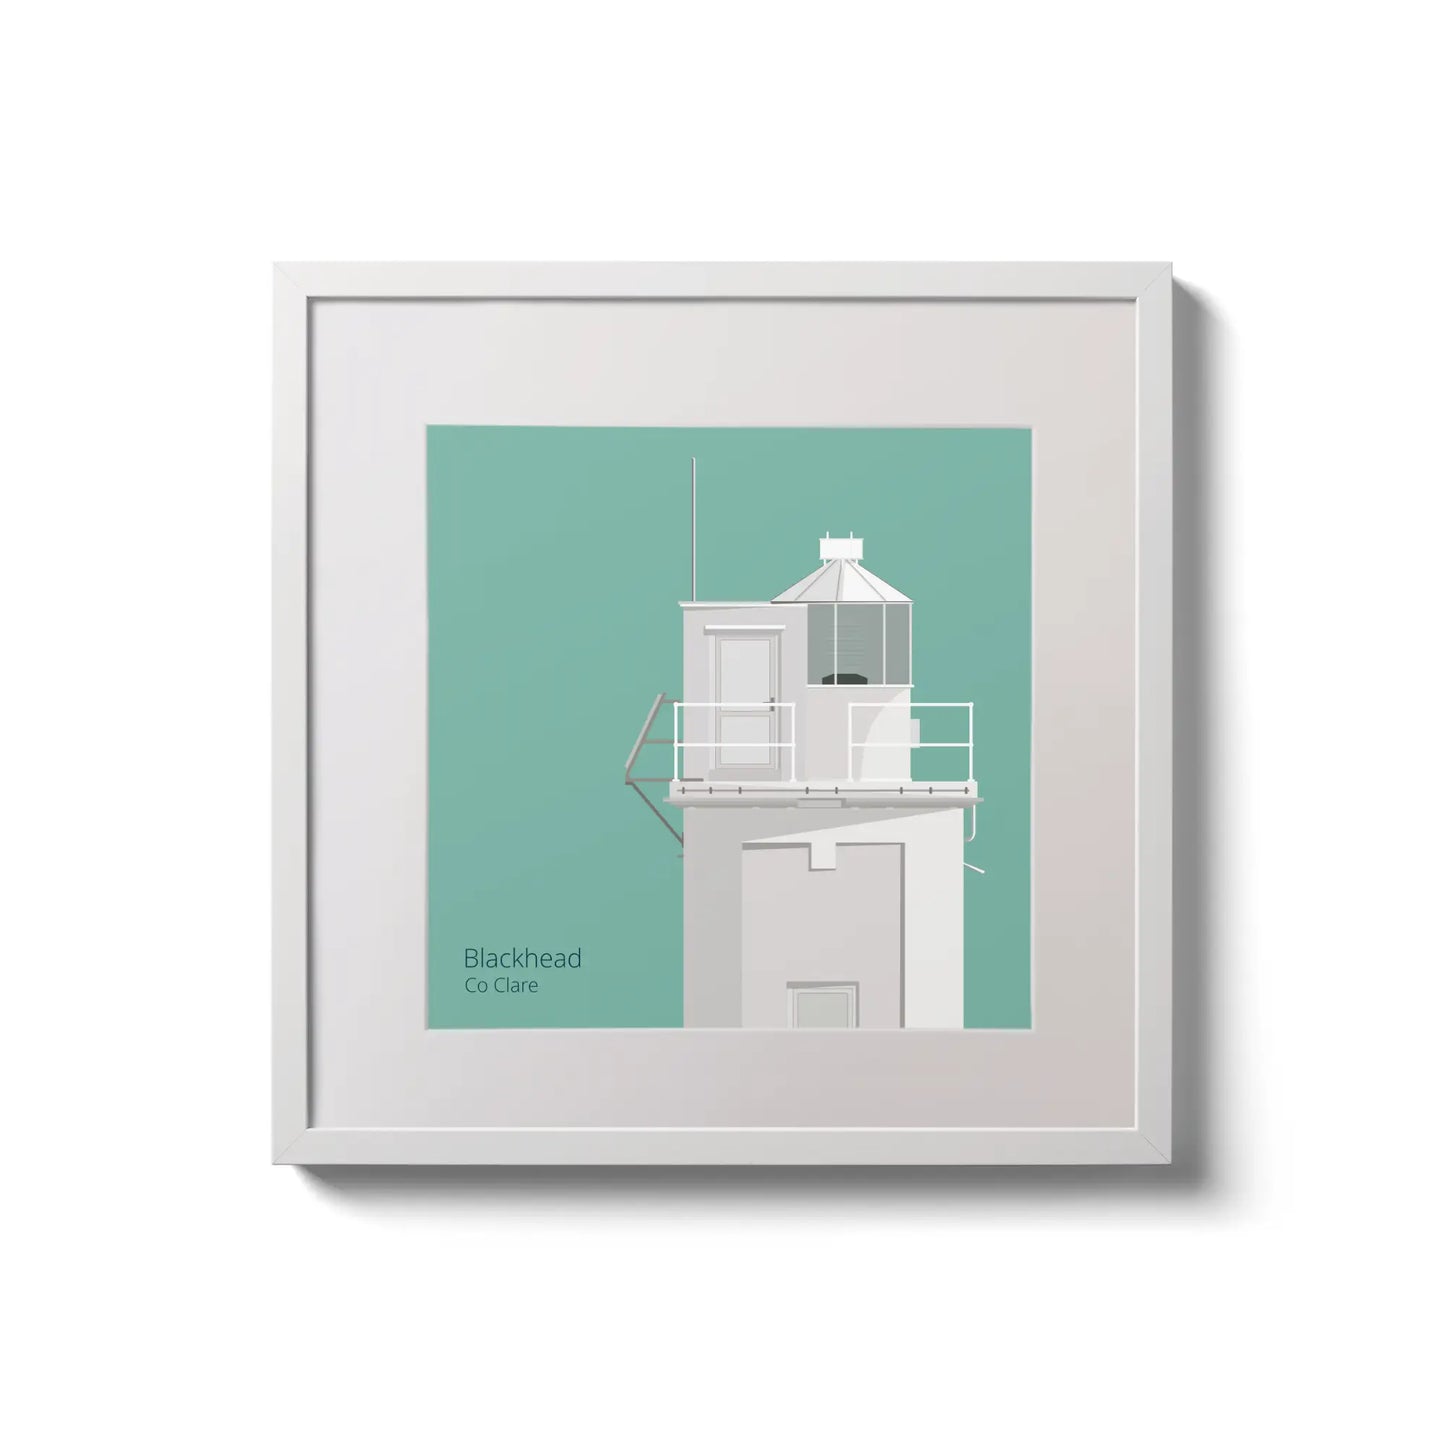 Illustration of Blackhead lighthouse on an ocean green background,  in a white square frame measuring 20x20cm.